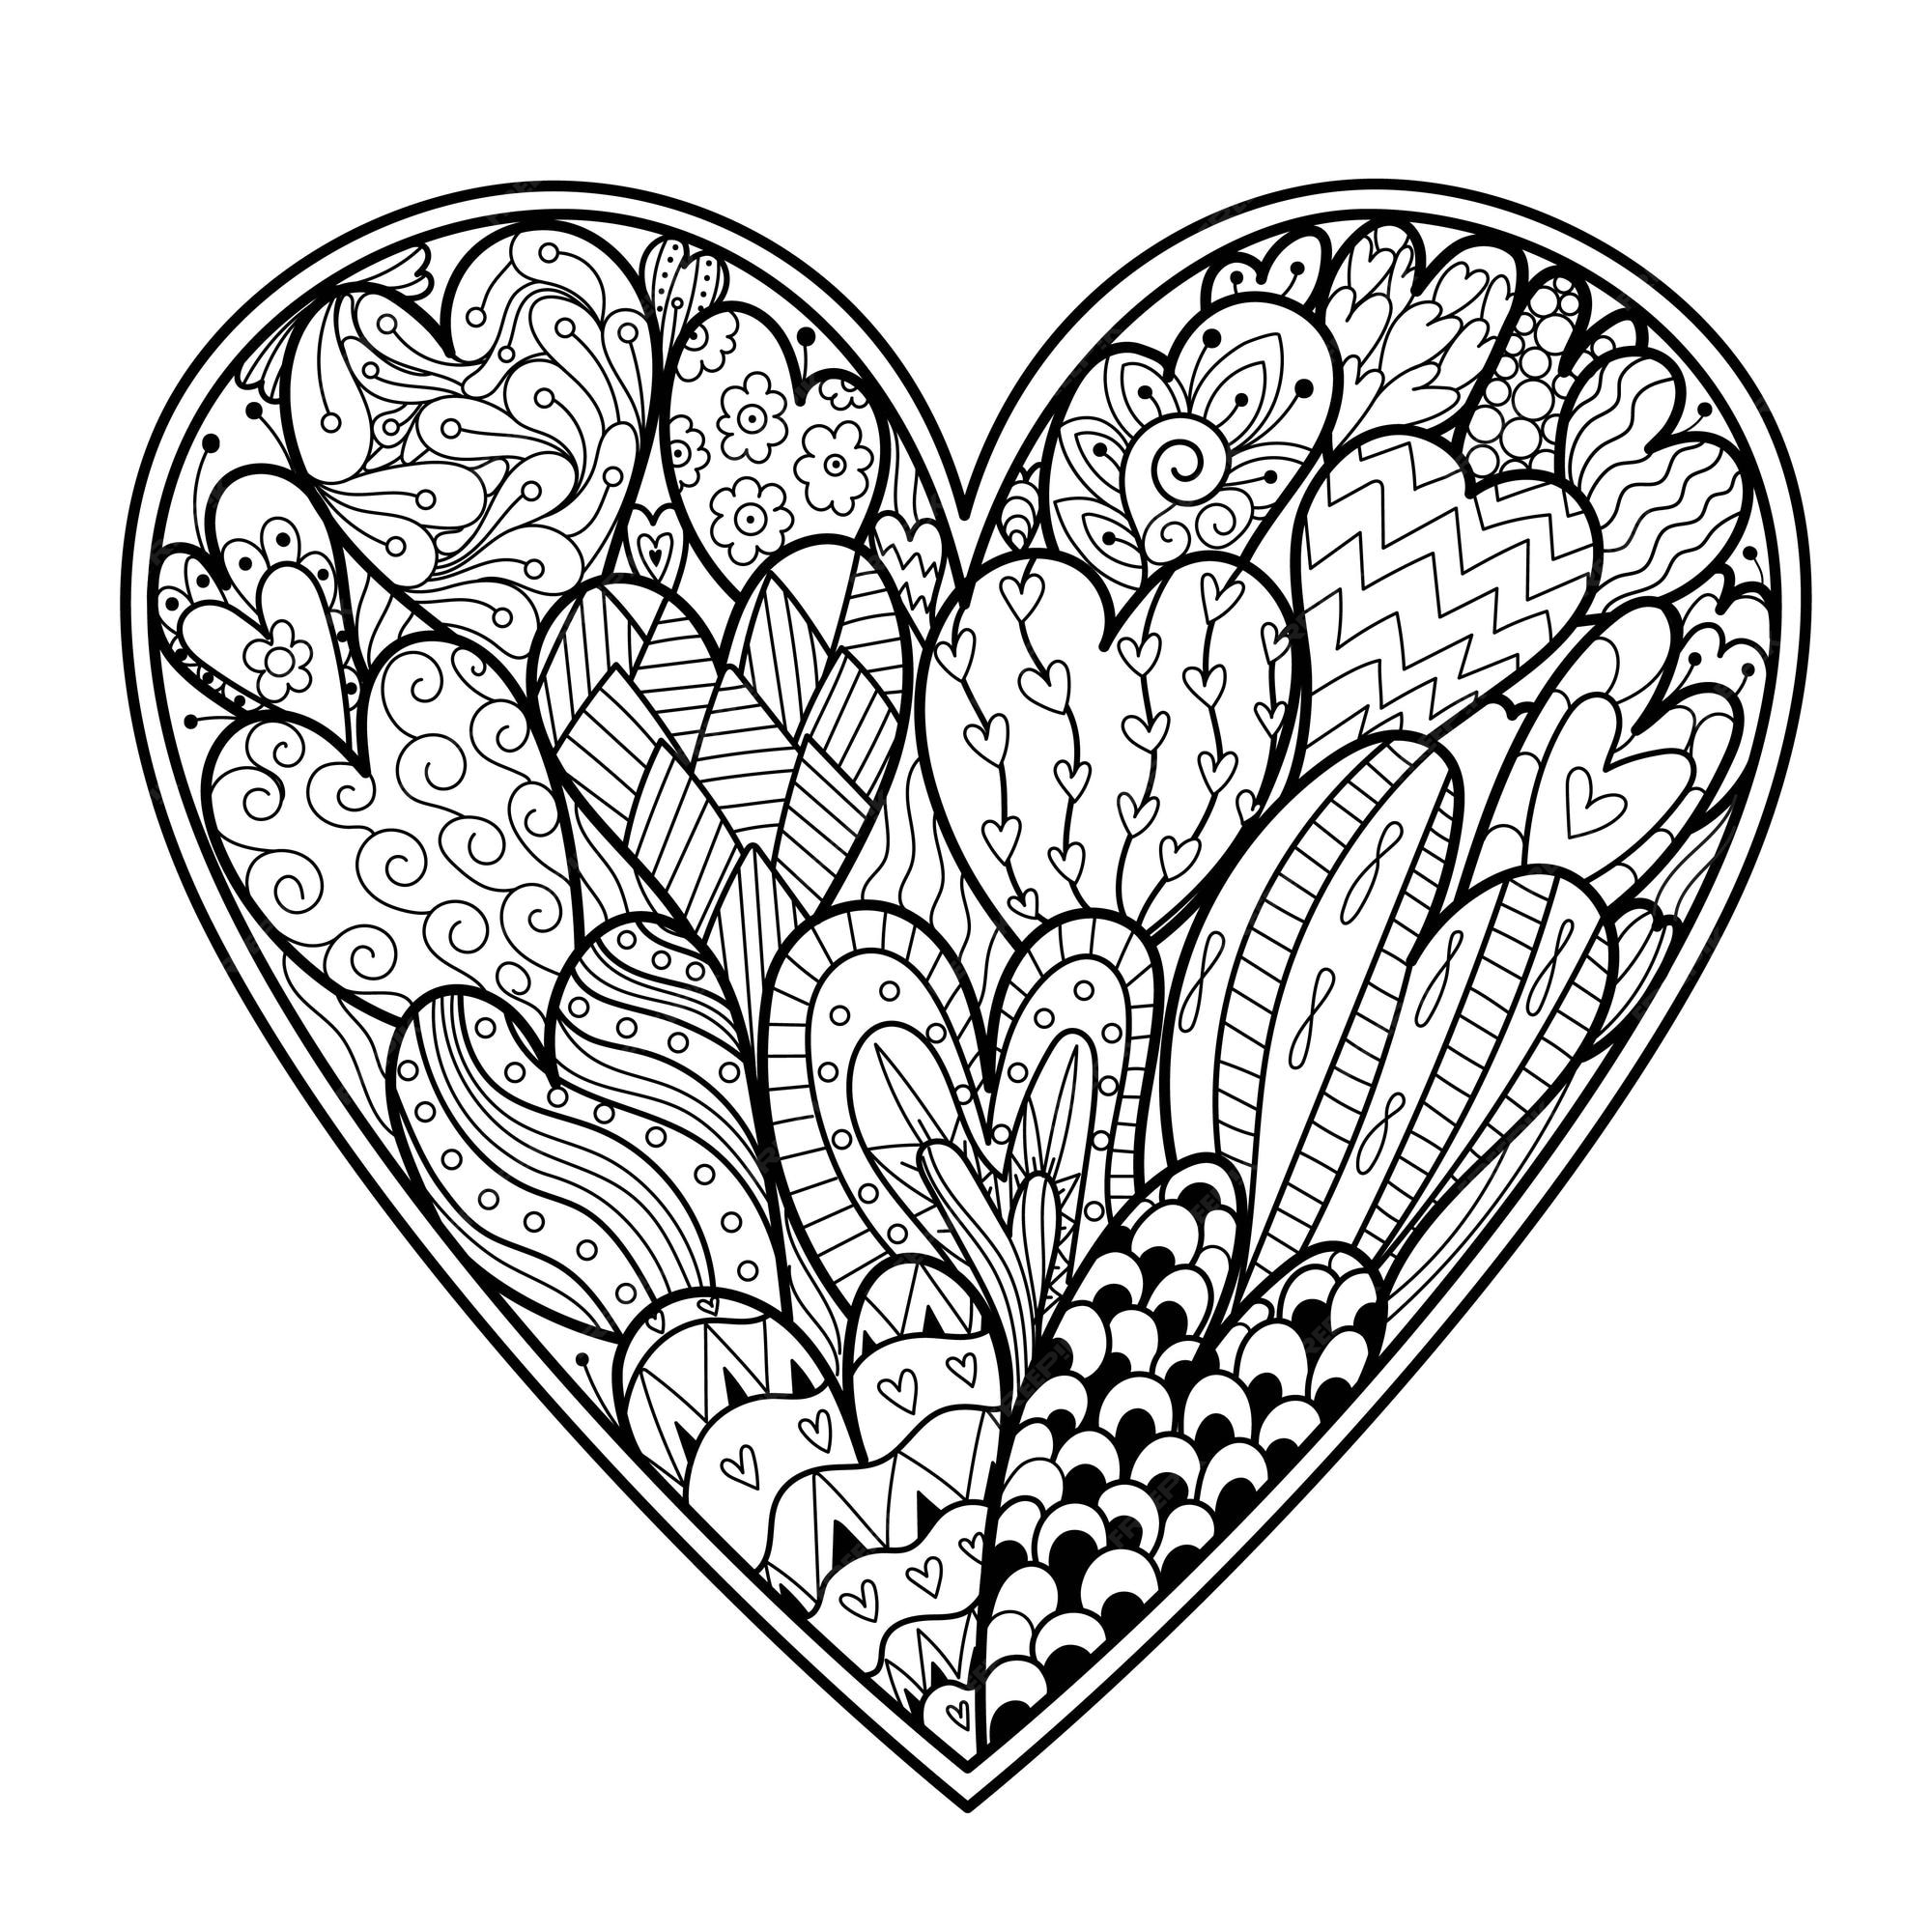 Premium Vector   Doodle heart coloring page black and white ...